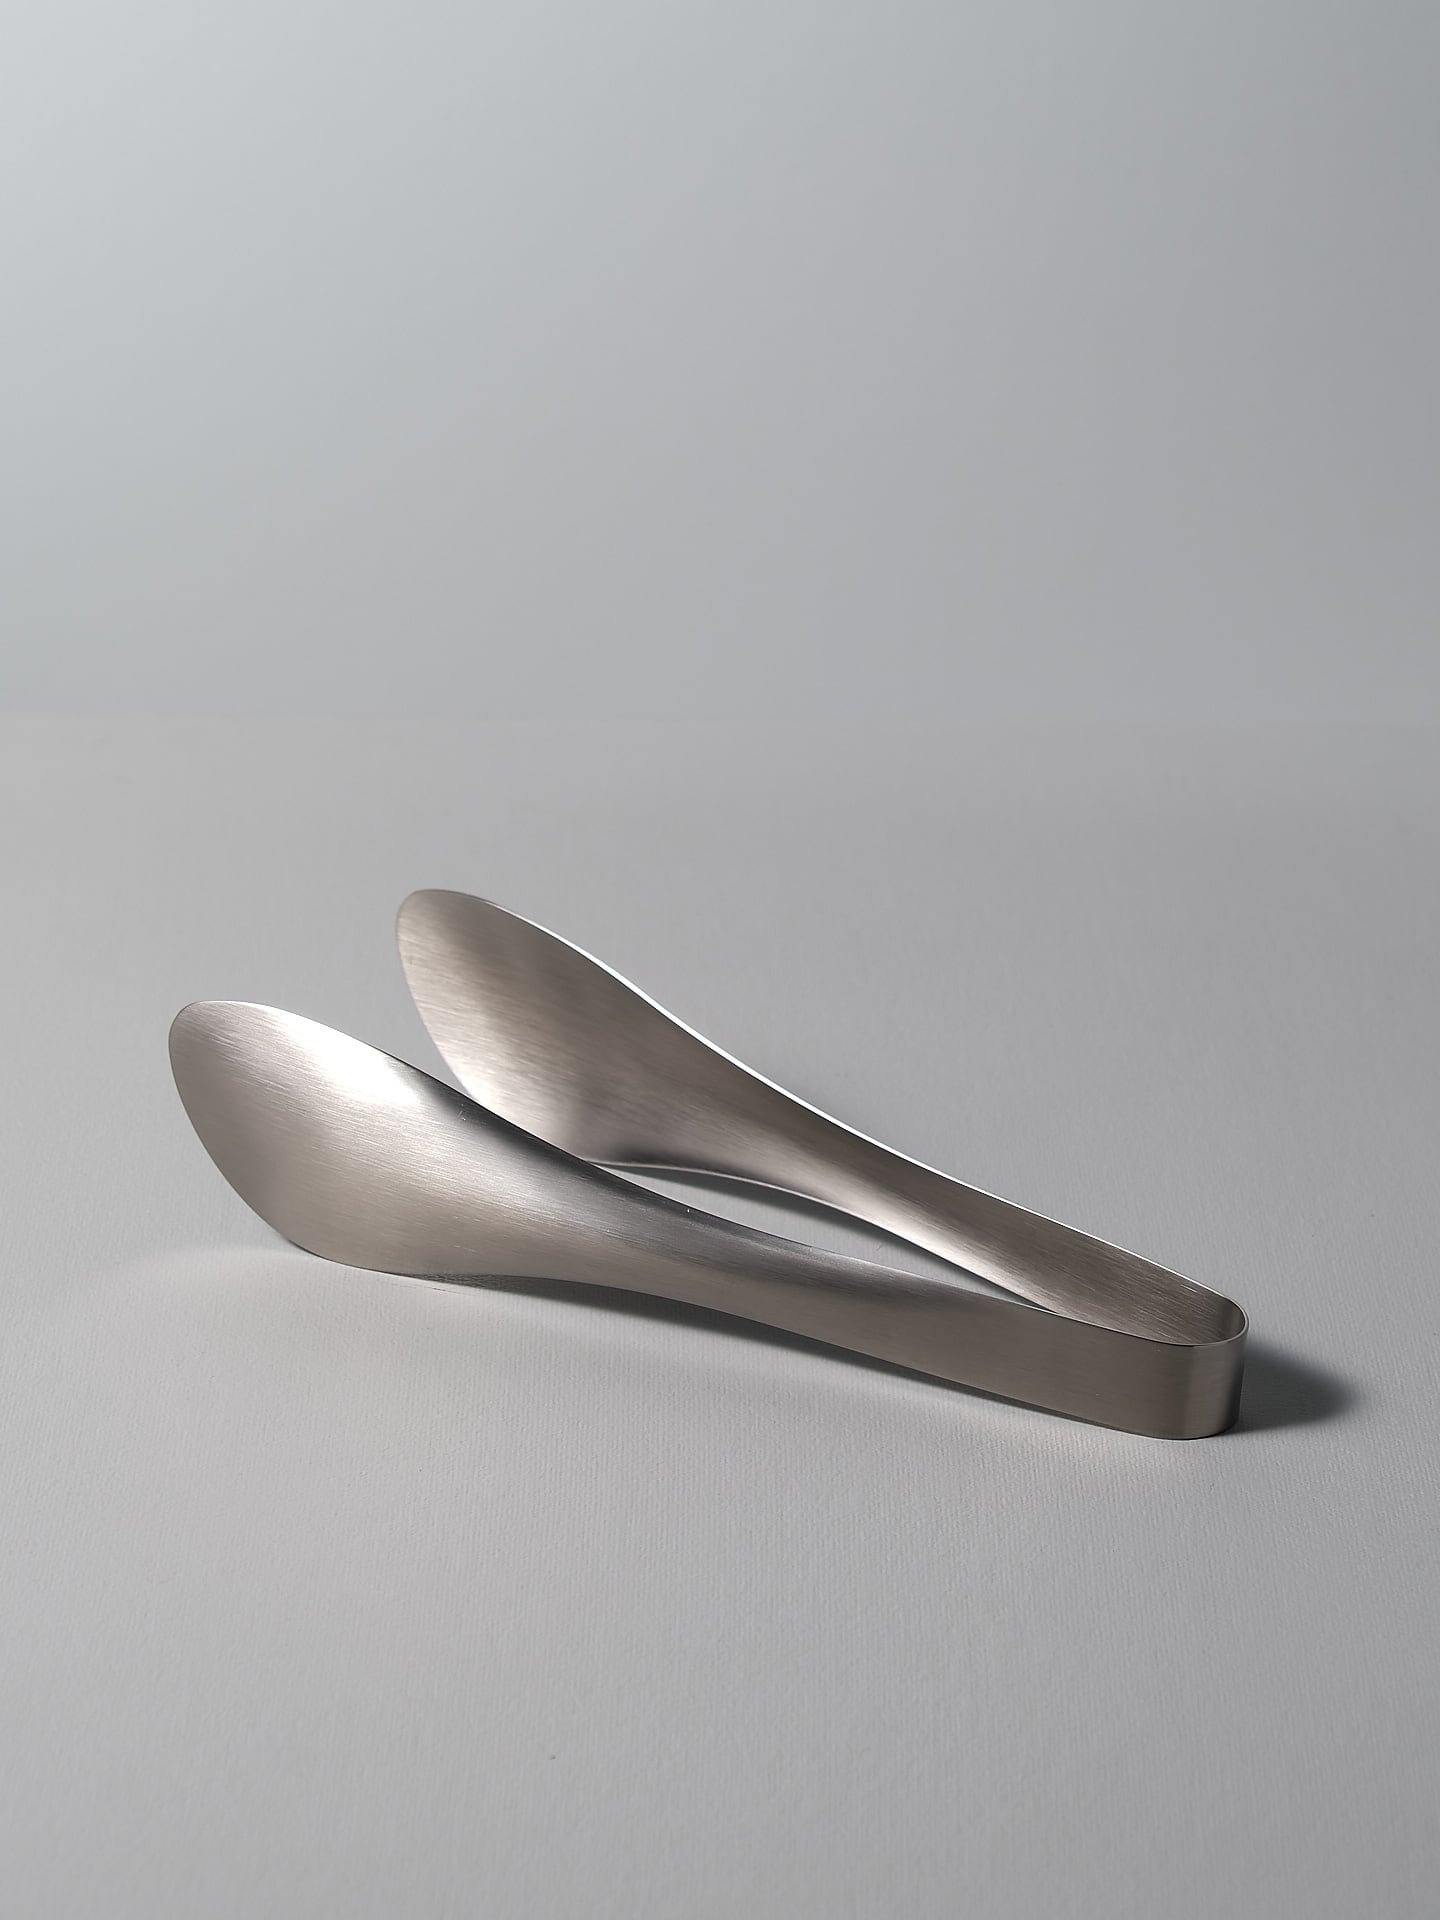 A pair of Sori Yanagi tongs on a white surface.